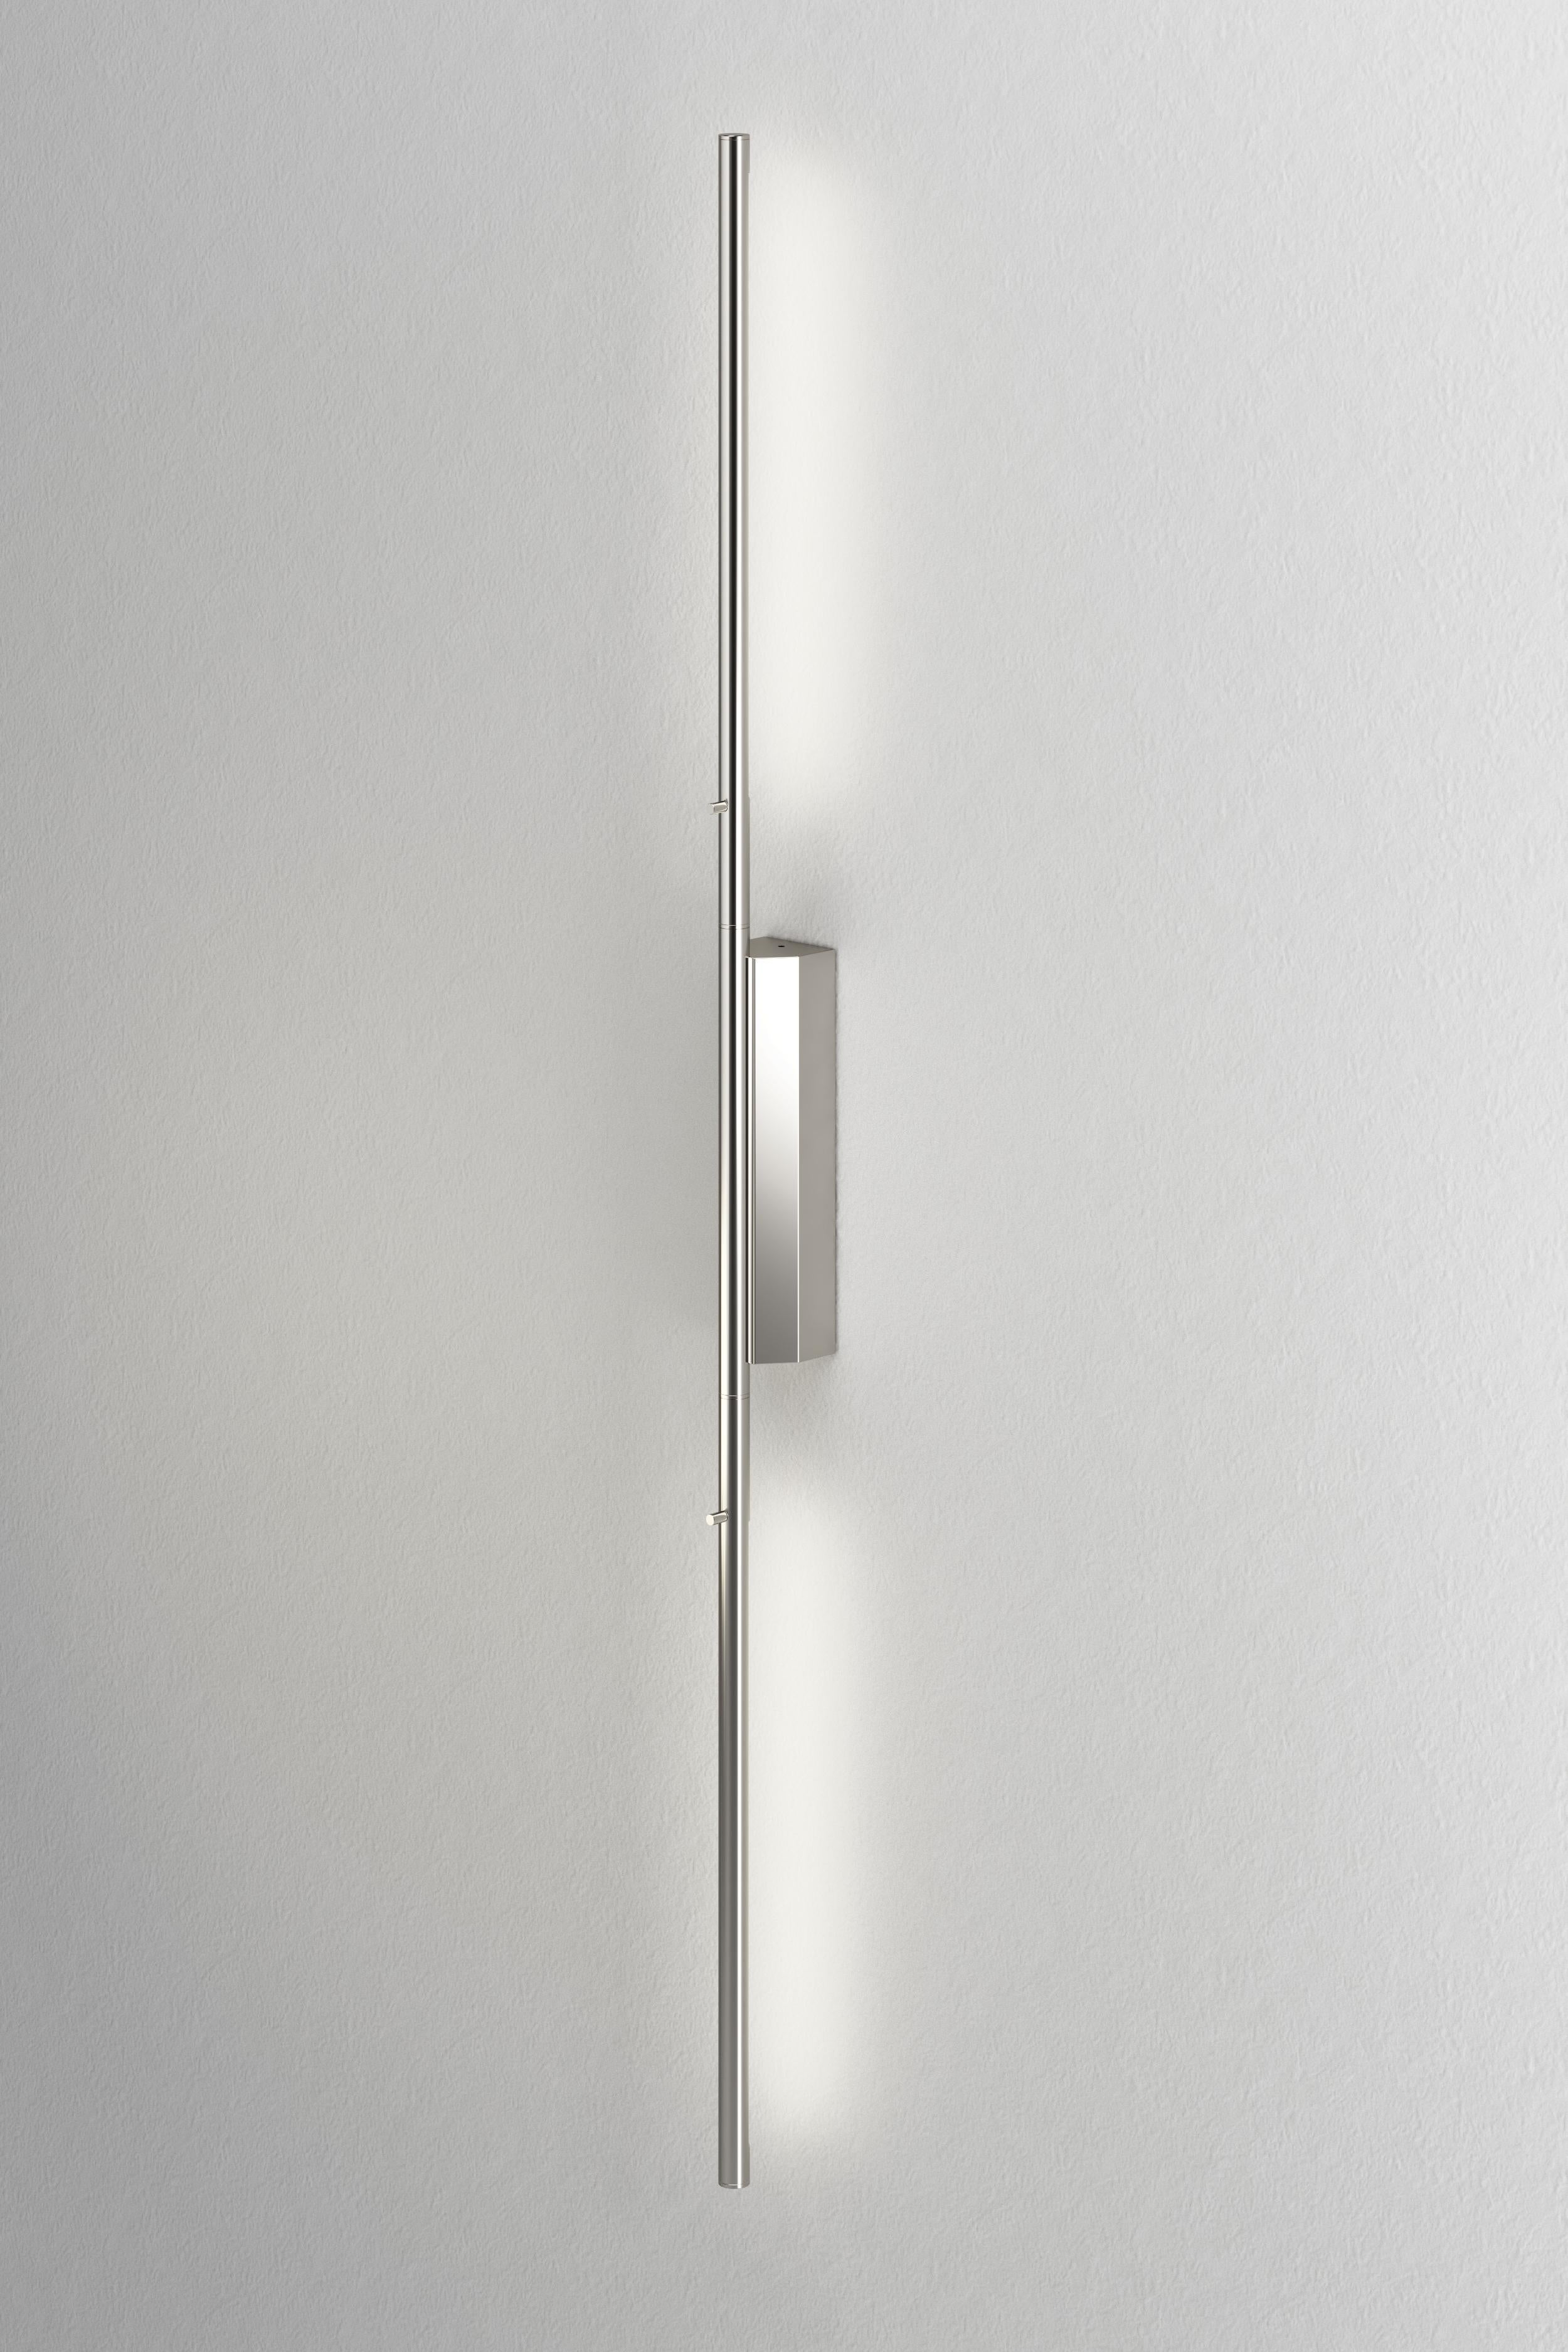 IP link double 960 polished nickel wall light by Emilie Cathelineau
Dimensions: D4.5 x W5 X H96 cm
Materials: Solid brass, polished nickel, LED, polycarbonate.
Others finishes and dimensions are available.

All our lamps can be wired according